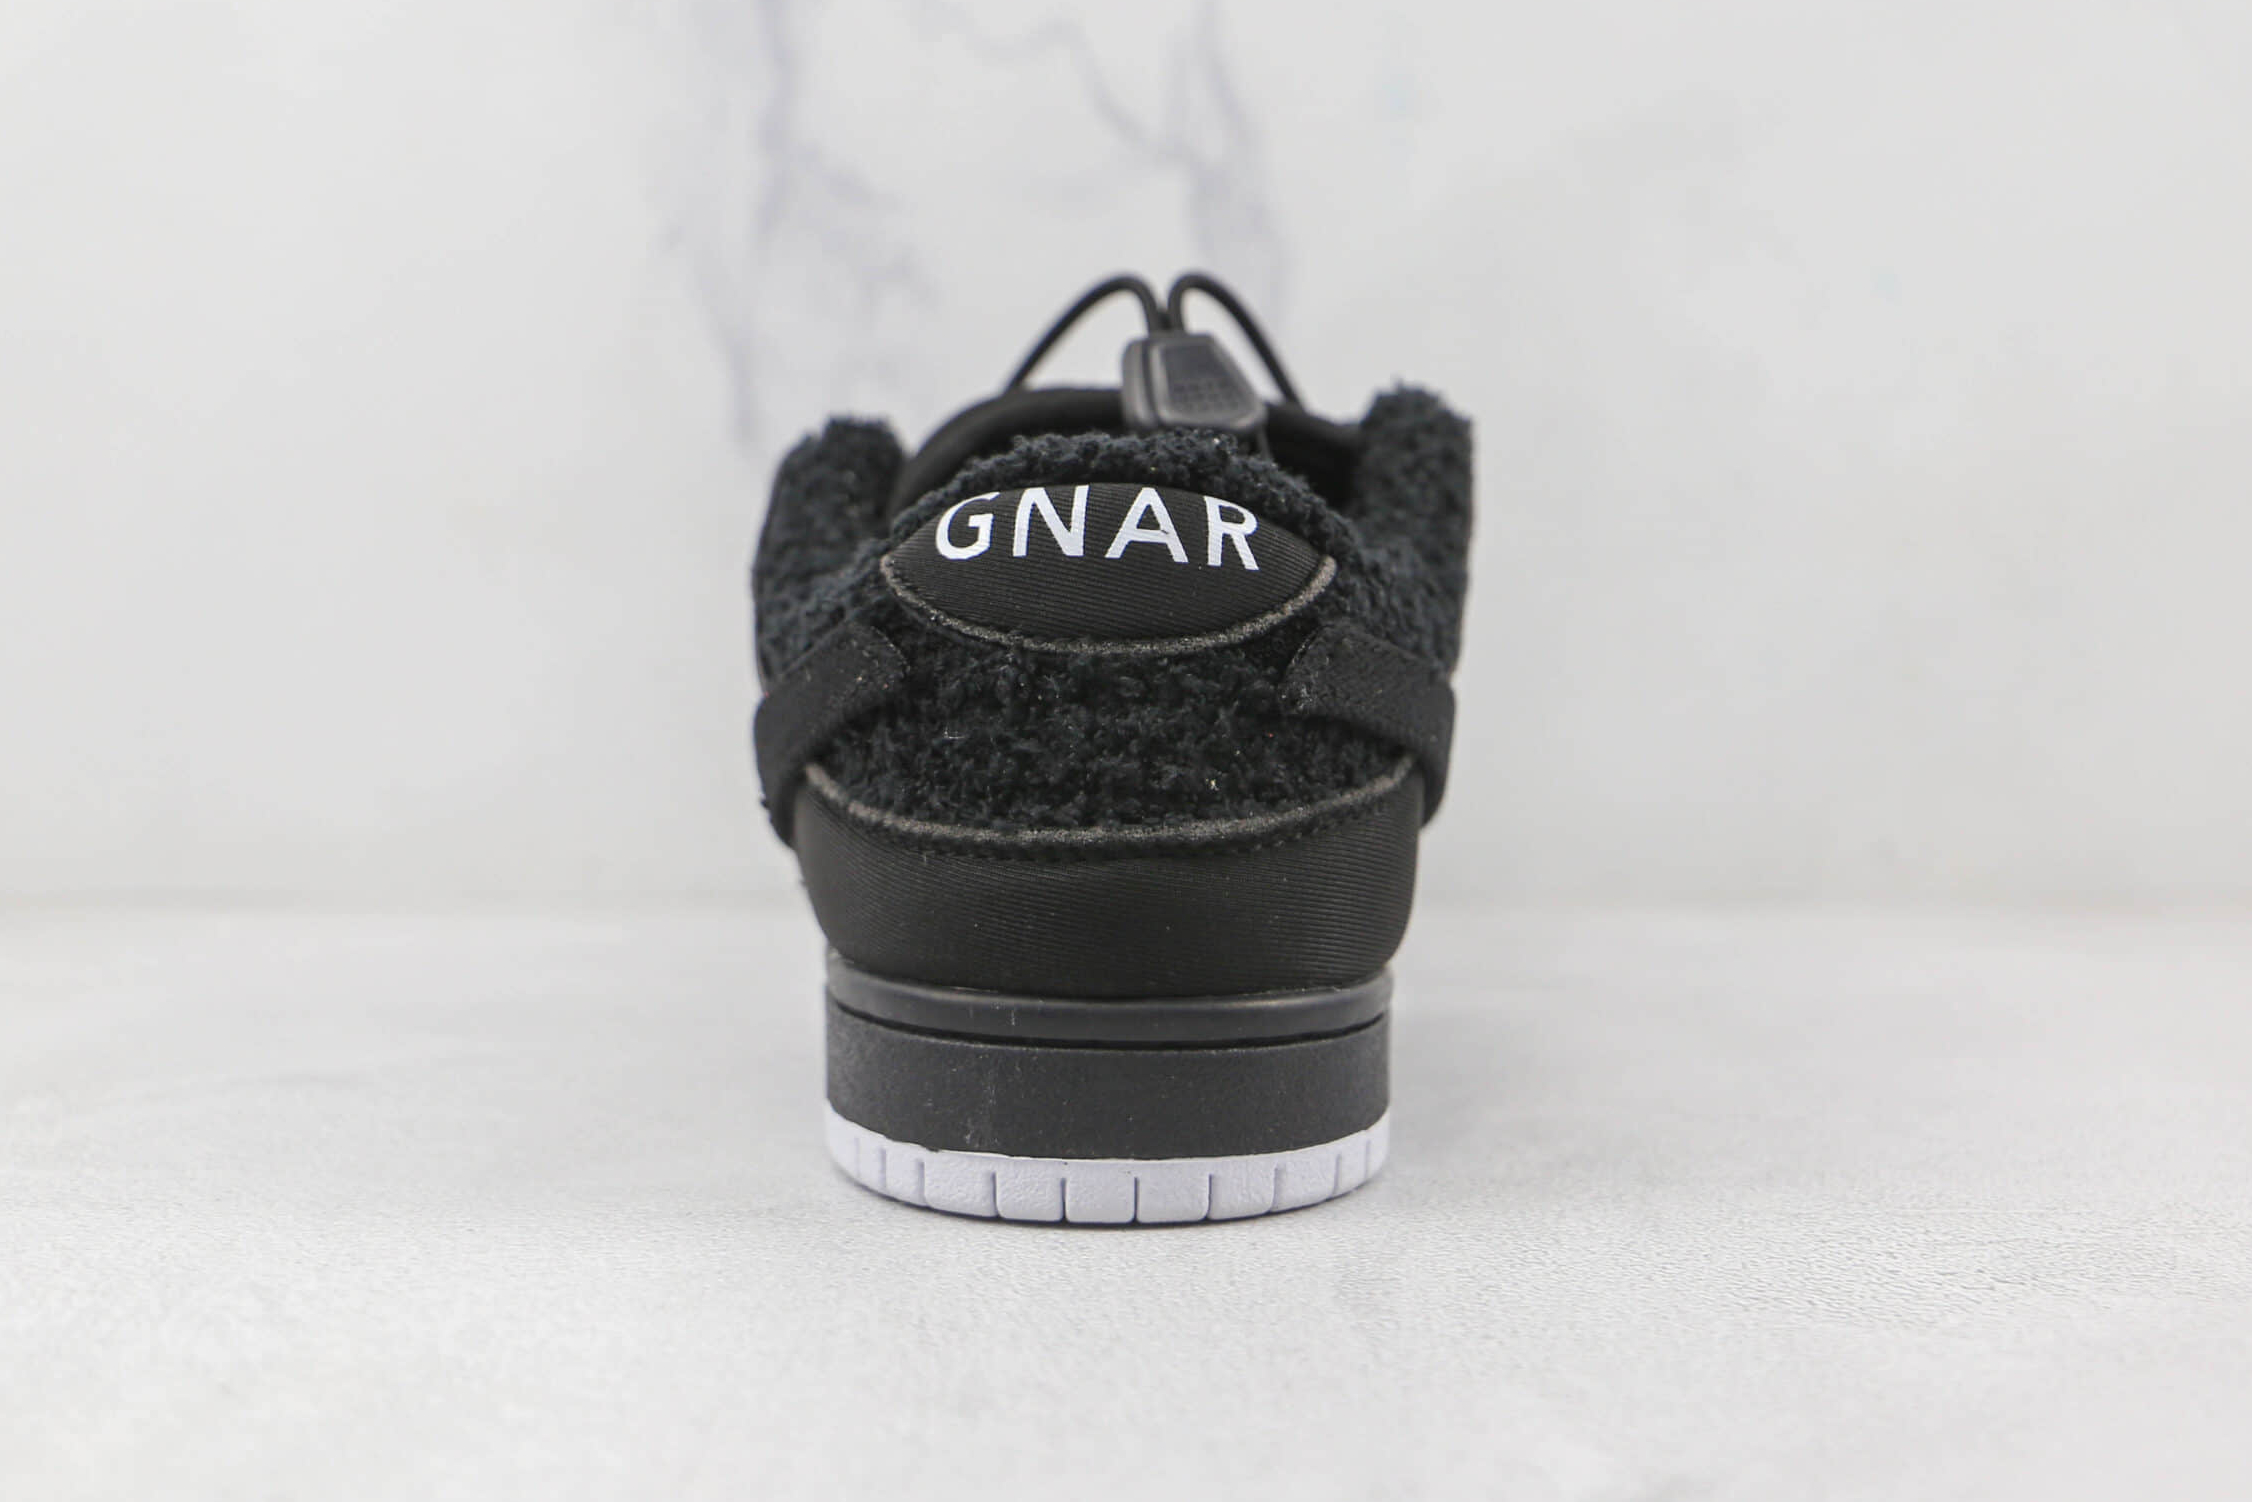 Nike Gnarhunters x Dunk Low SB 'Black' DH7756-010 - Exclusive Skate Shoe Collaboration | Limited Stock!